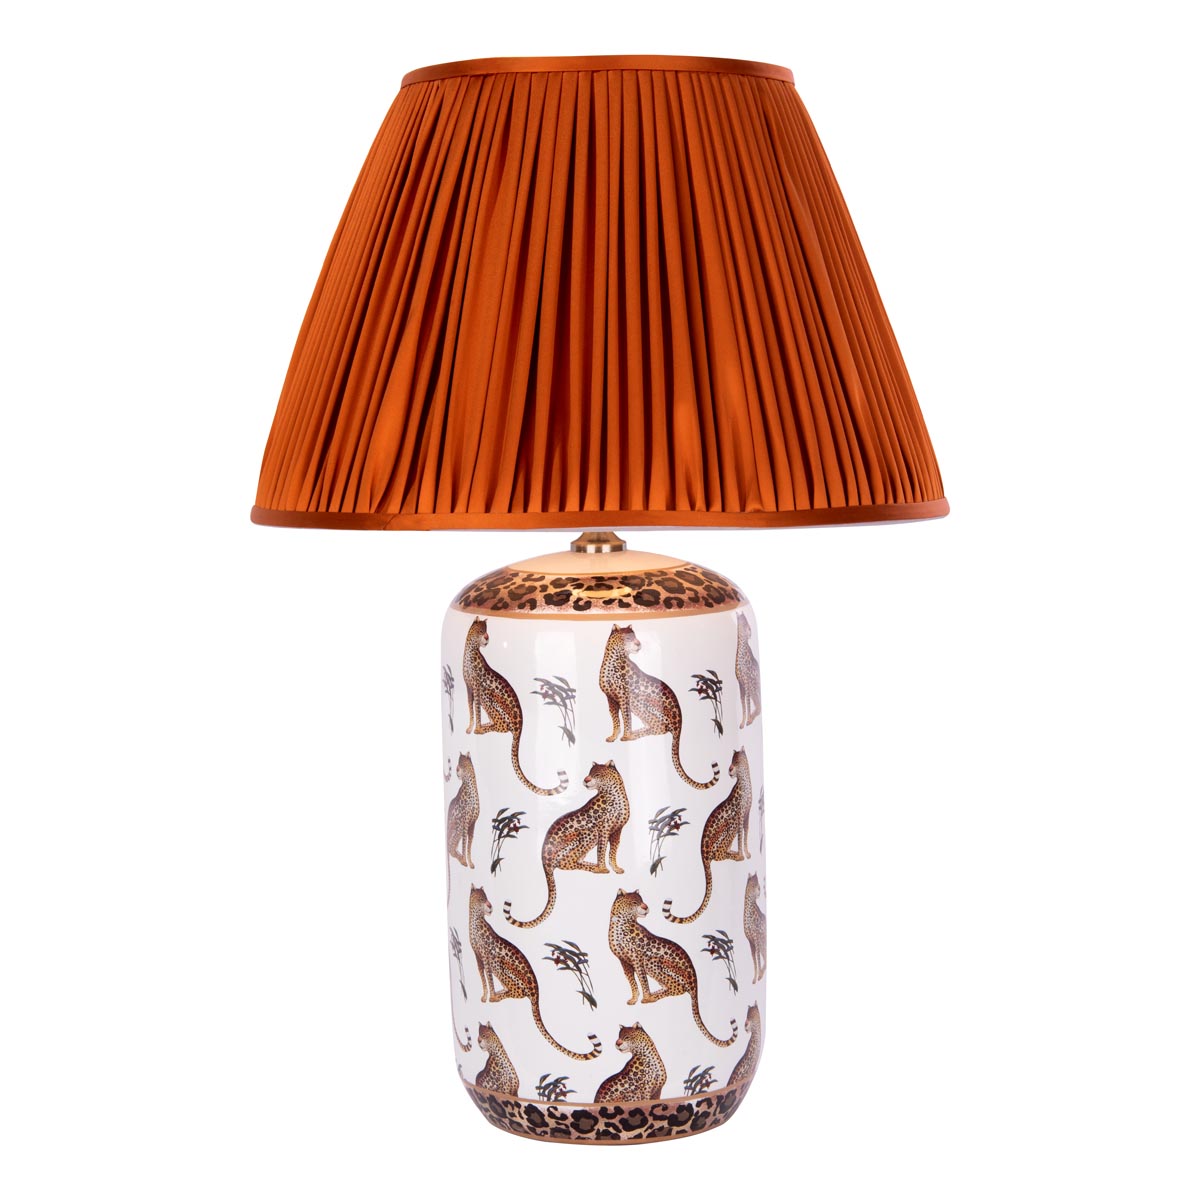 Tigris Ceramic Table Lamp White Leopard Motif with Shade